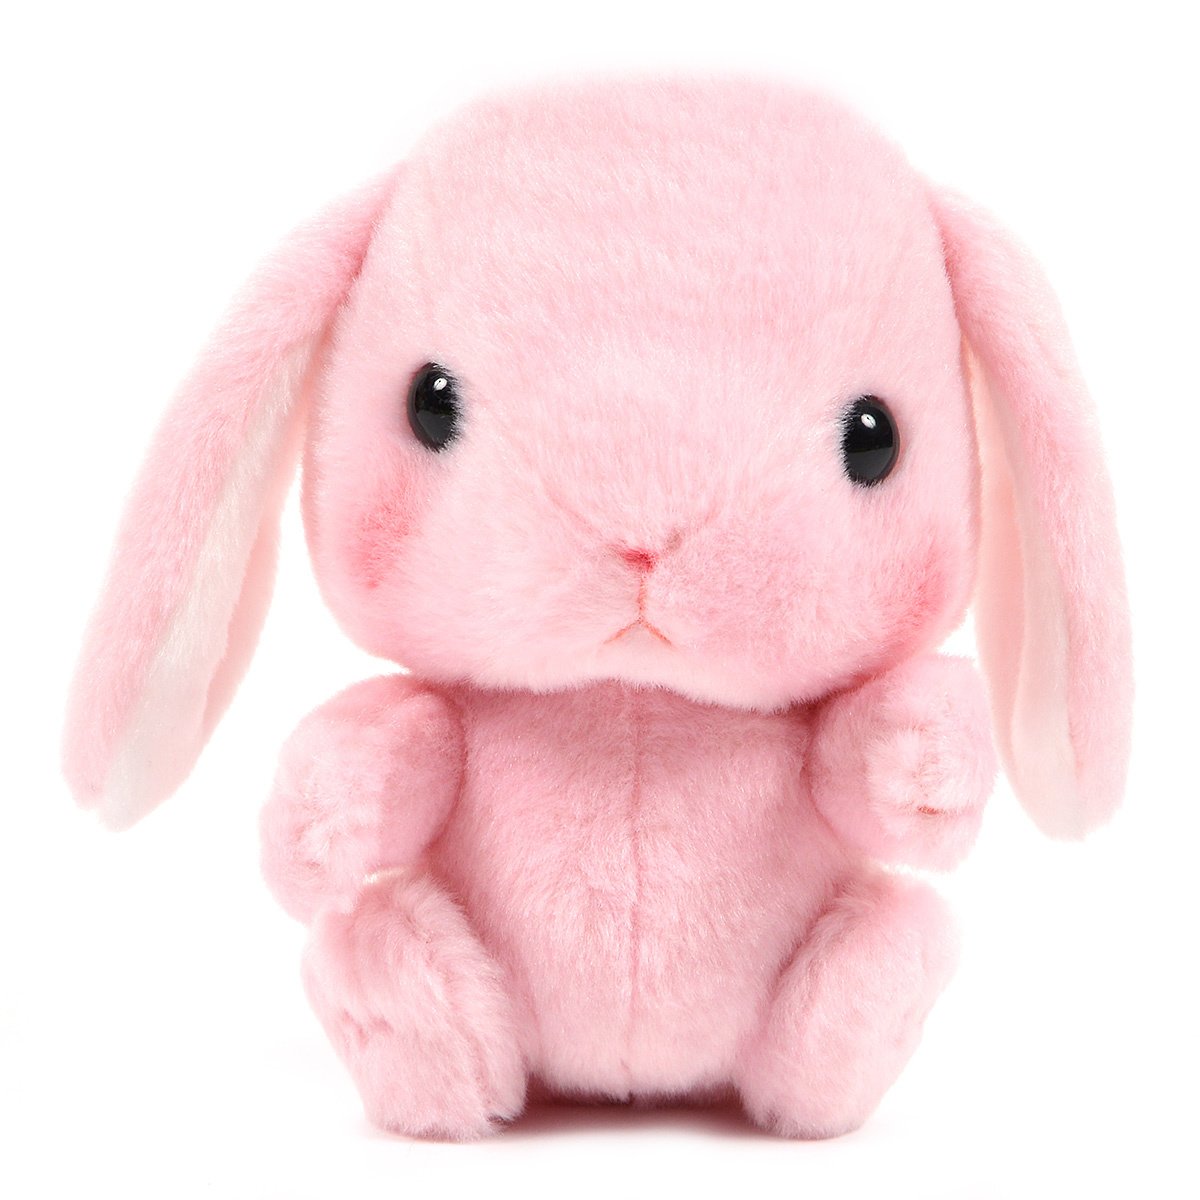 Amuse Bunny Plushie Cute Stuffed Animal Toy Pink 6 Inches